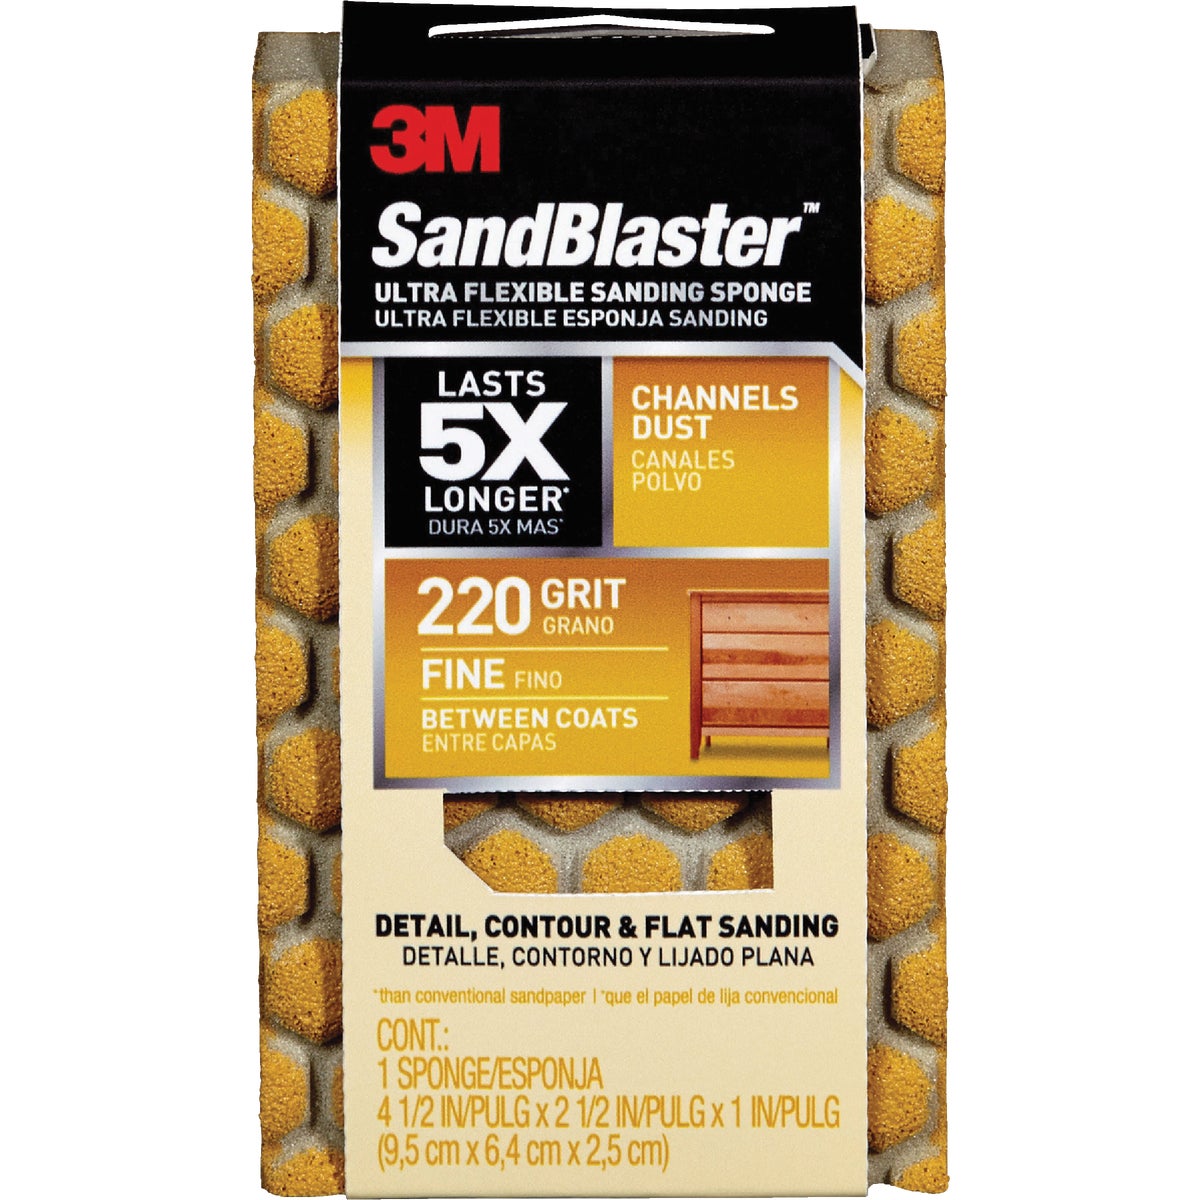 Item 302400, Keep your surface clean as you hand sand with the 3M SandBlaster Dust 